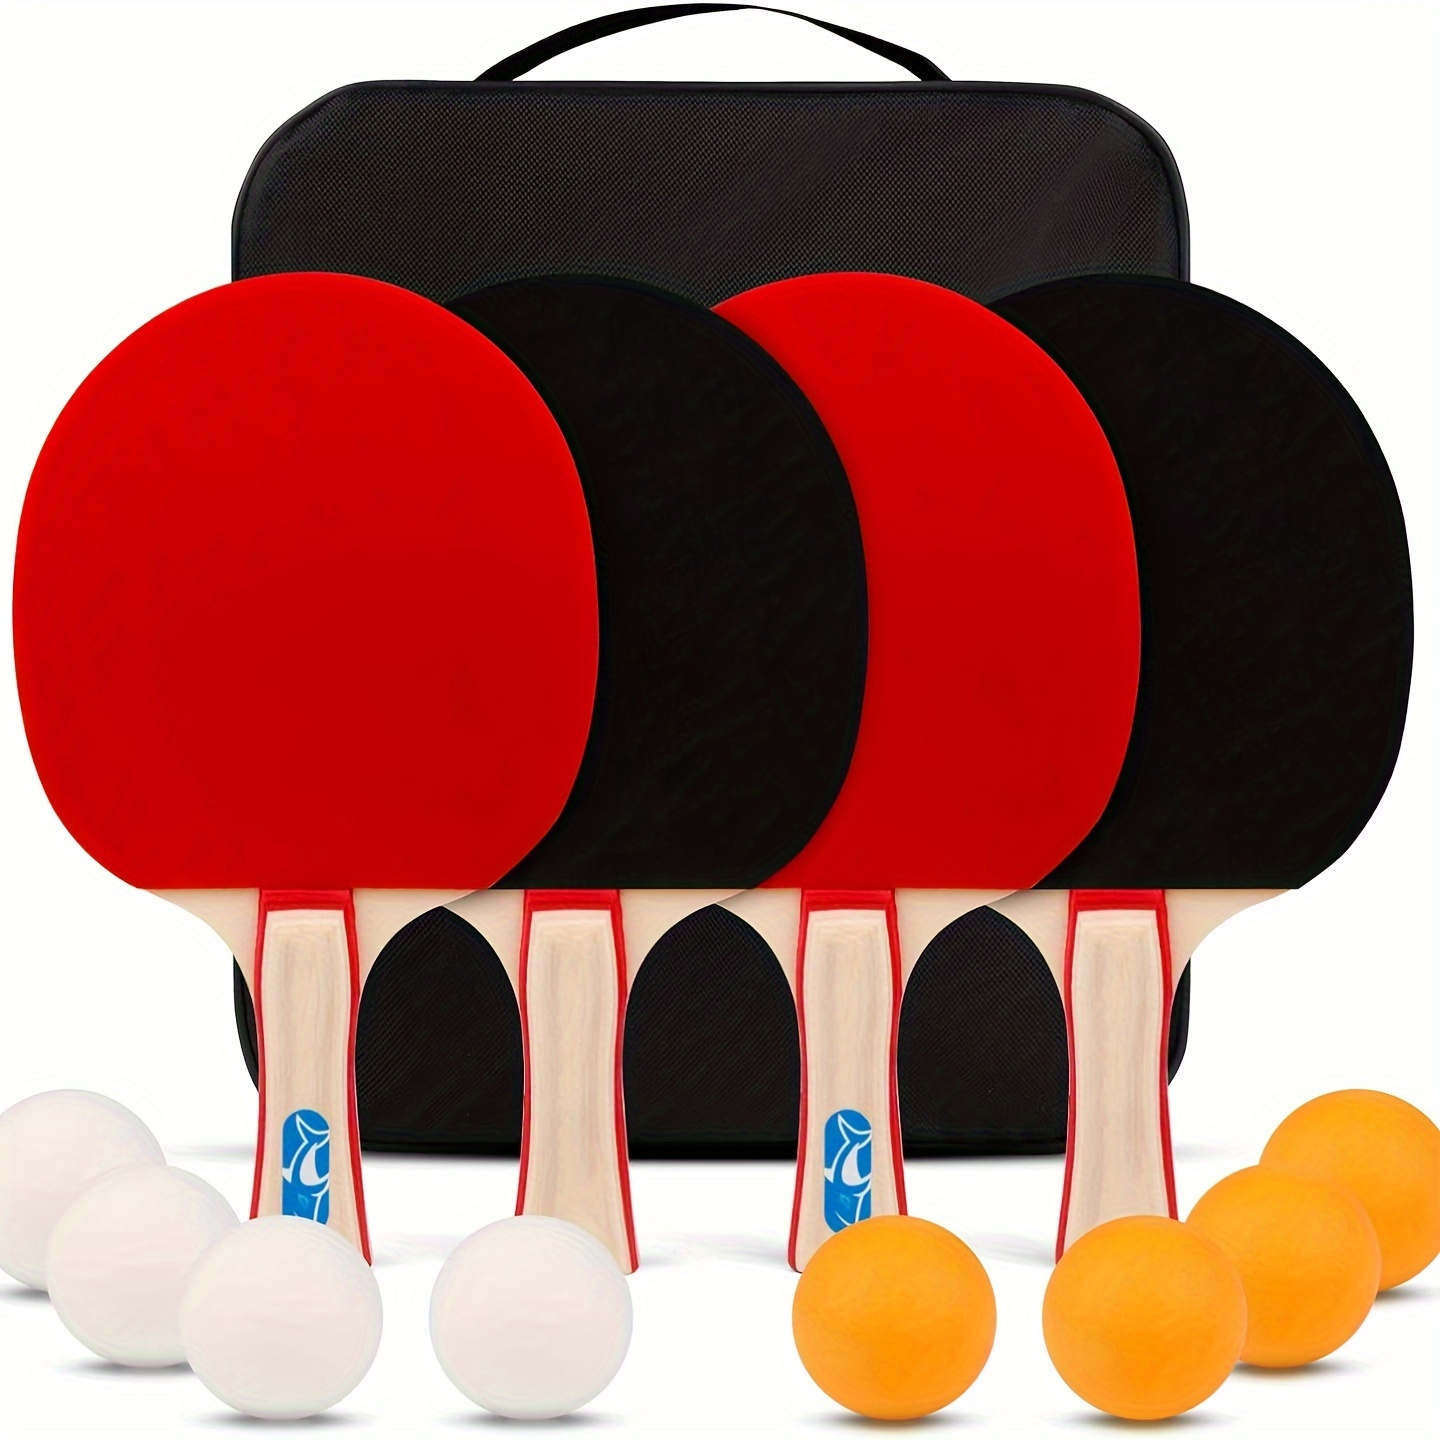 

Pong Paddle Set, Complete Table Tennis Set, Table Tennis Racket Set, 4 Paddles, 8 Balls, Portable Storage Case, Optimize Spin And Control, For Indoor Outdoor Play